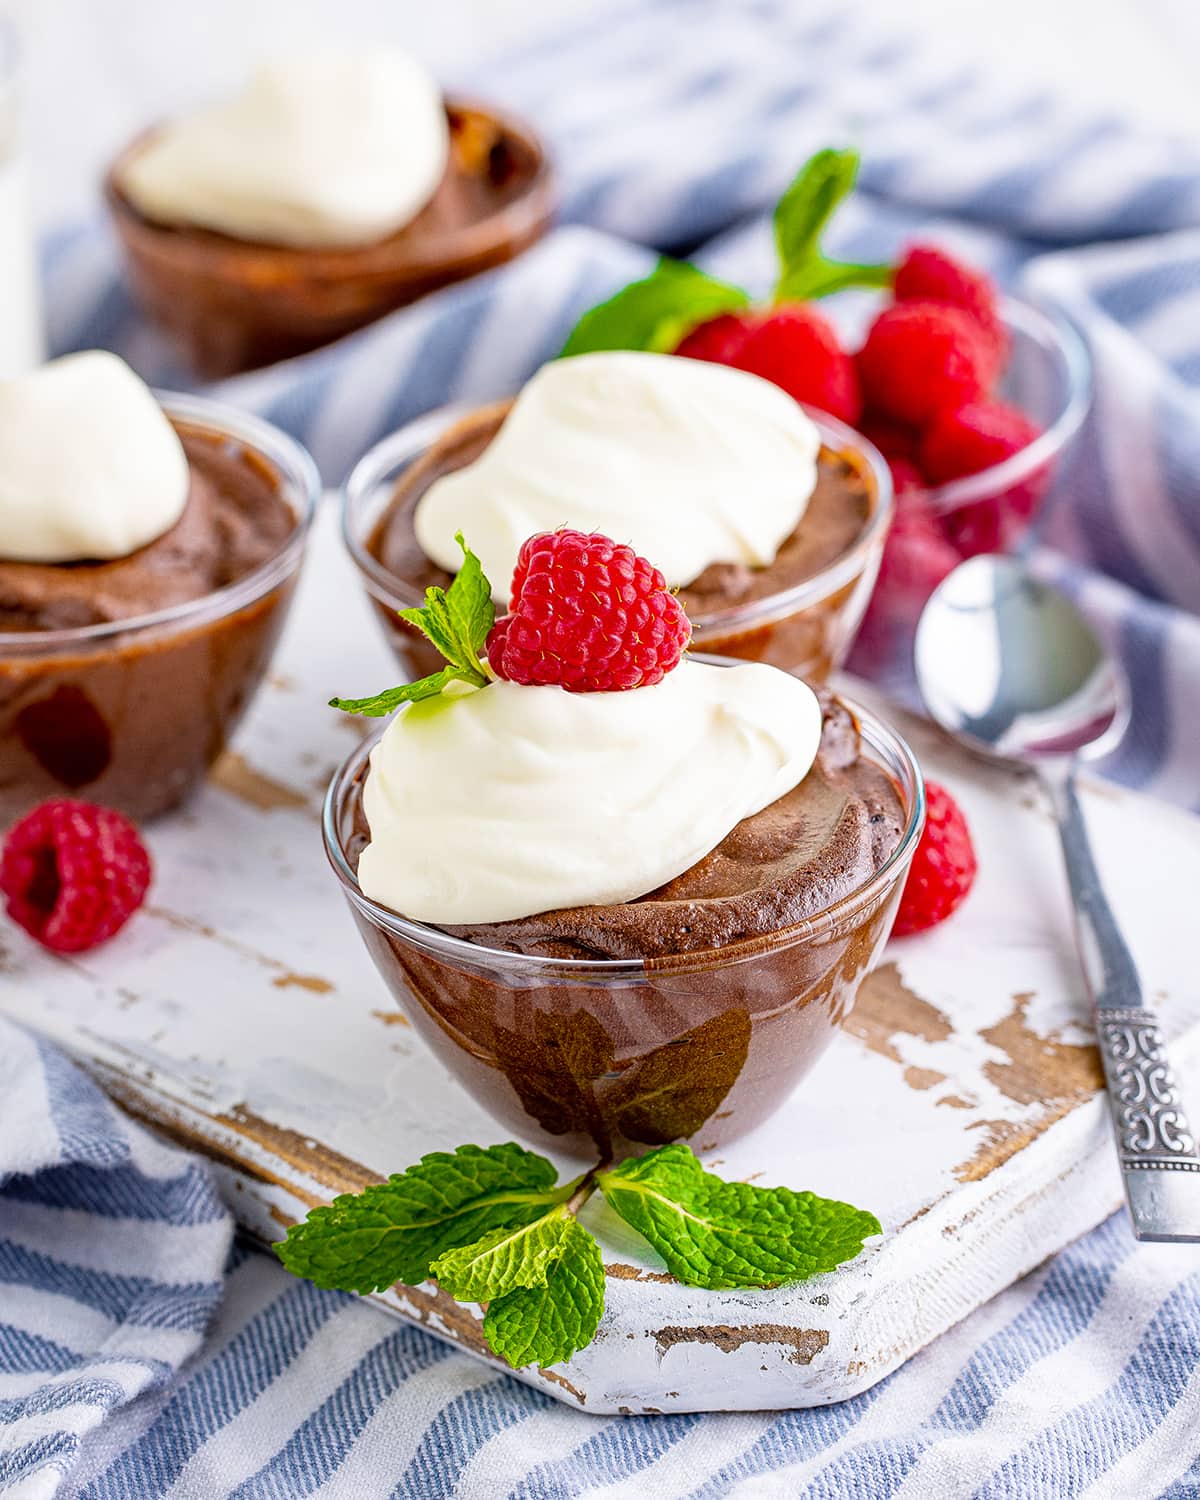 Bowls of fluffy chocolate mousse with whipped cream and raspberries on top.